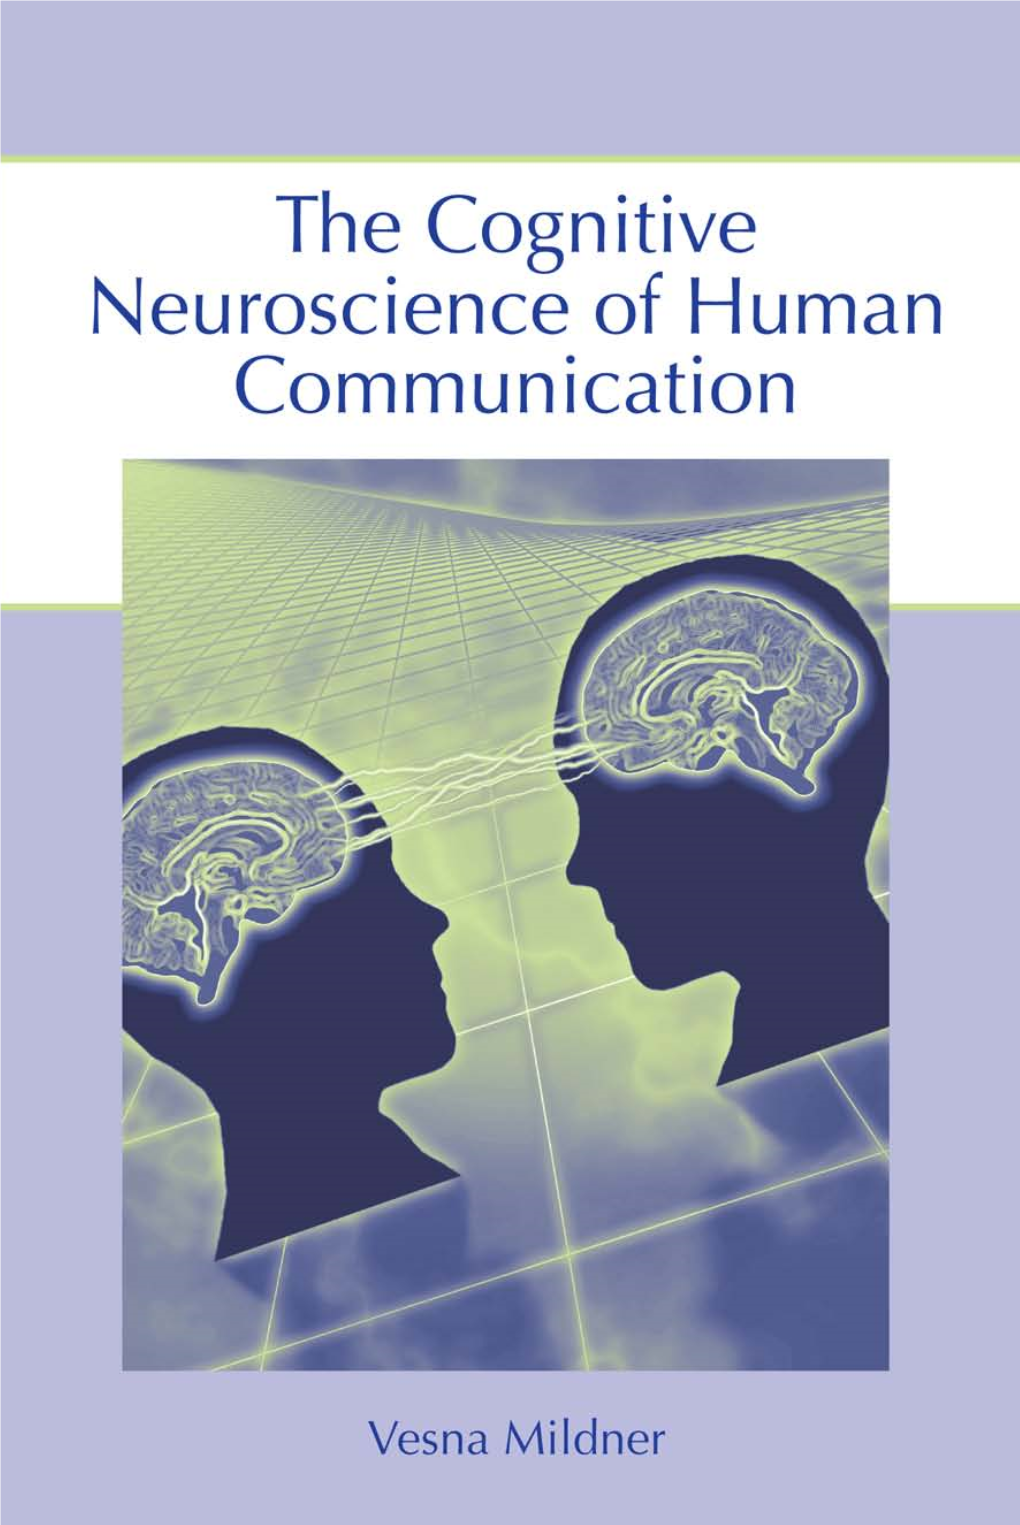 The Cognitif Neuroscience of Human